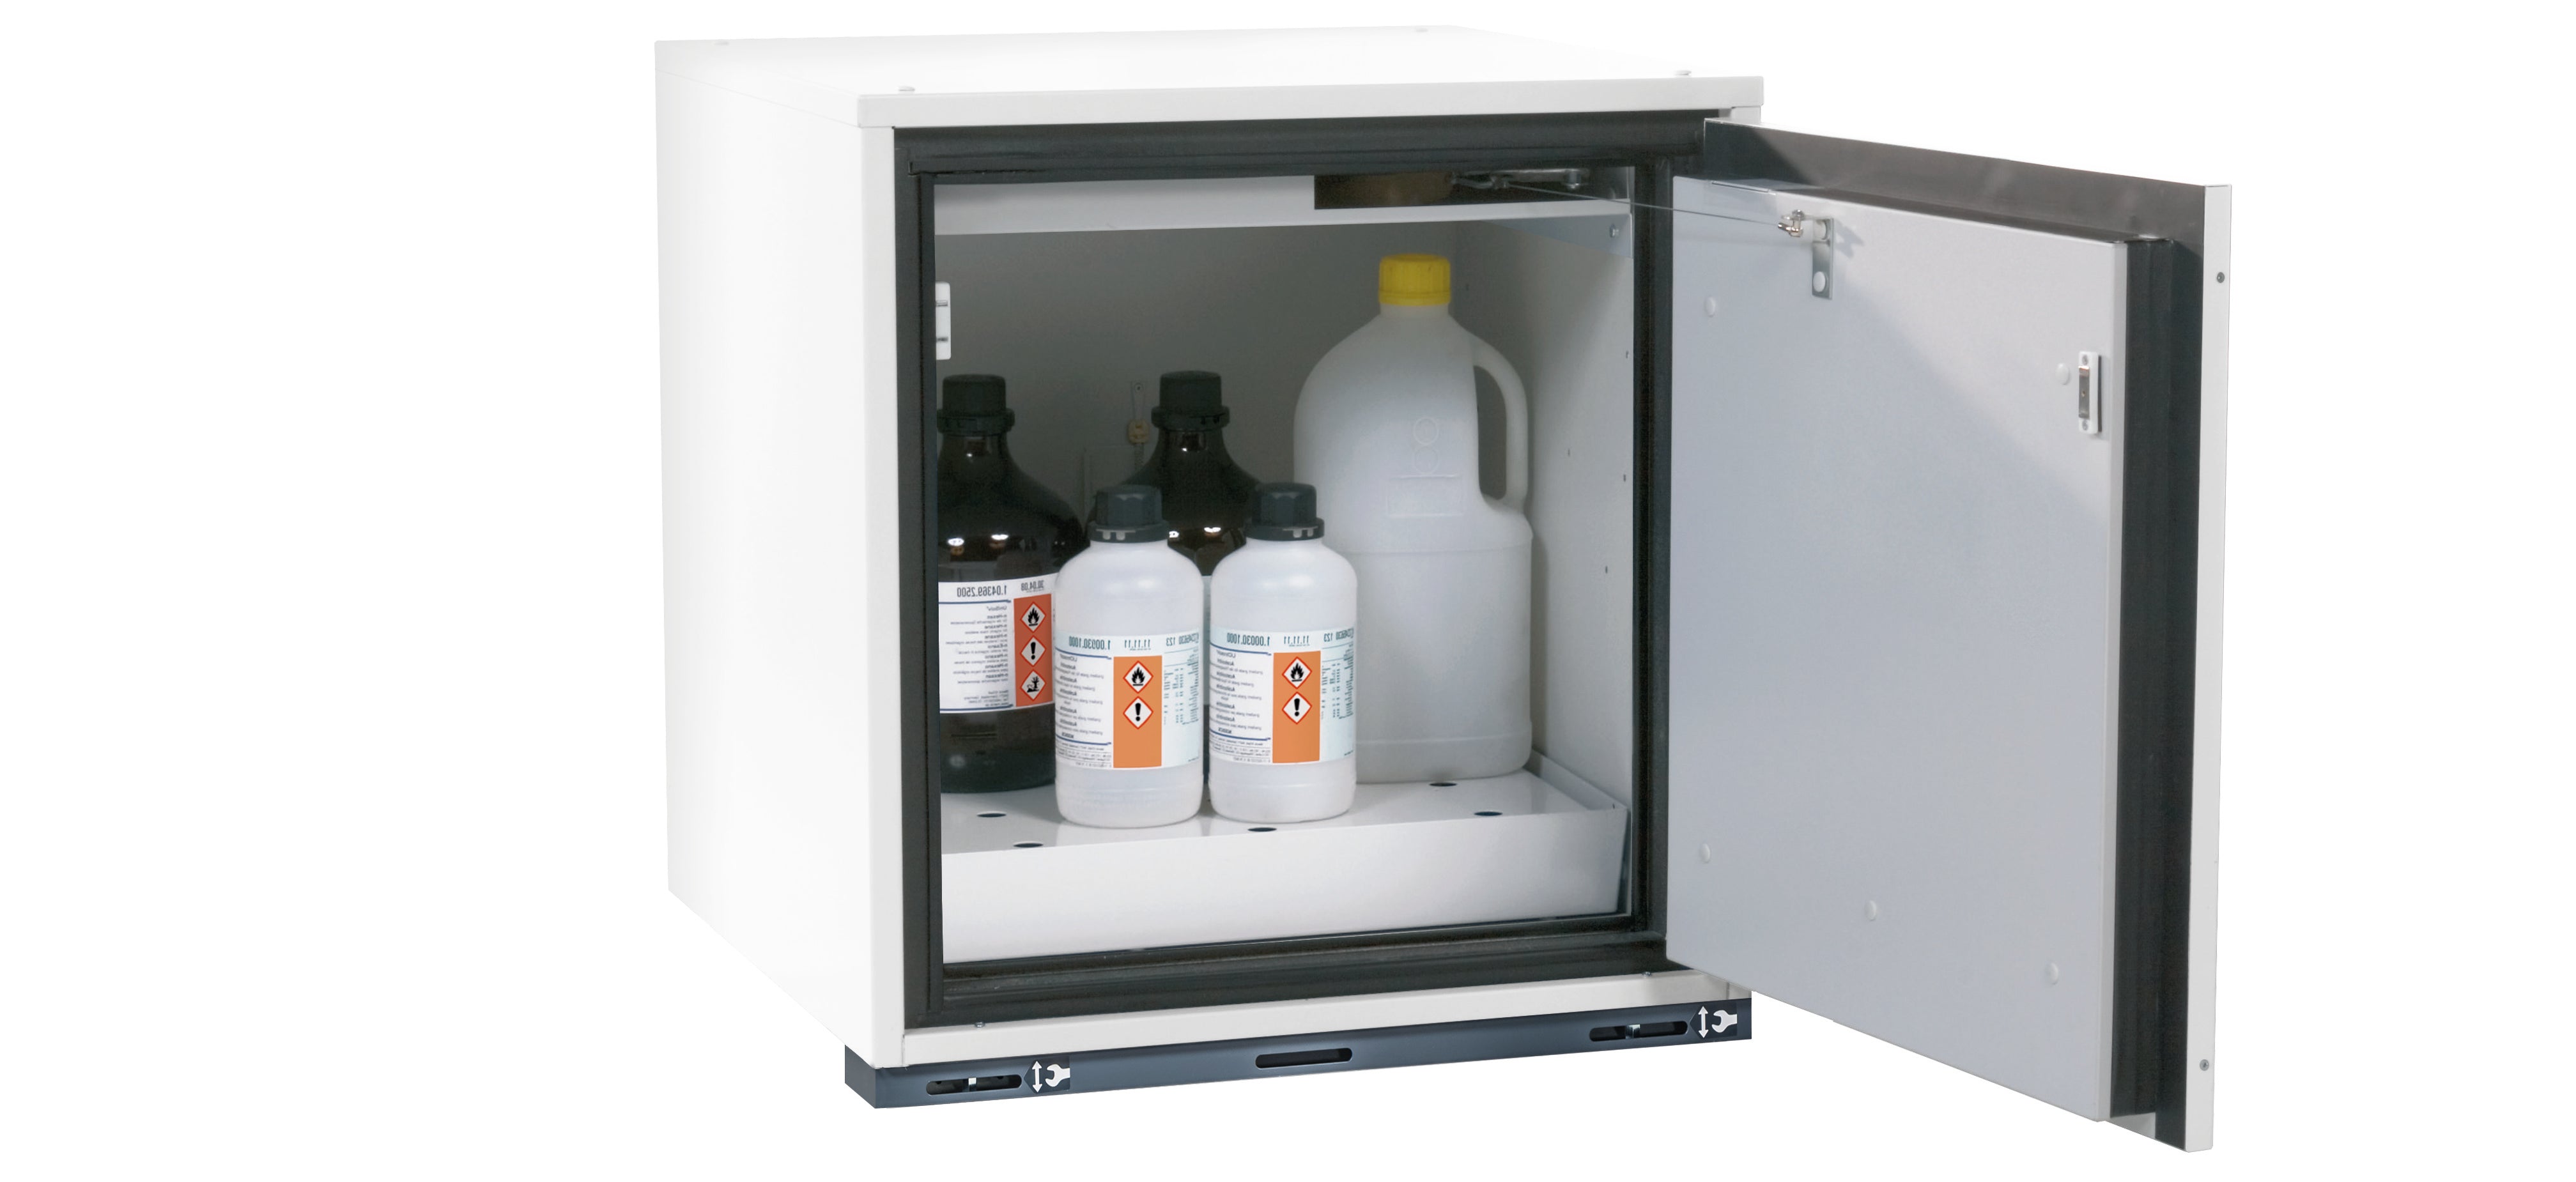 Type 90 safety base cabinet UB-T-90 model UB90.060.059.050.TR in laboratory white (similar to RAL 9016) with 1x perforated sheet insert standard (sheet steel)